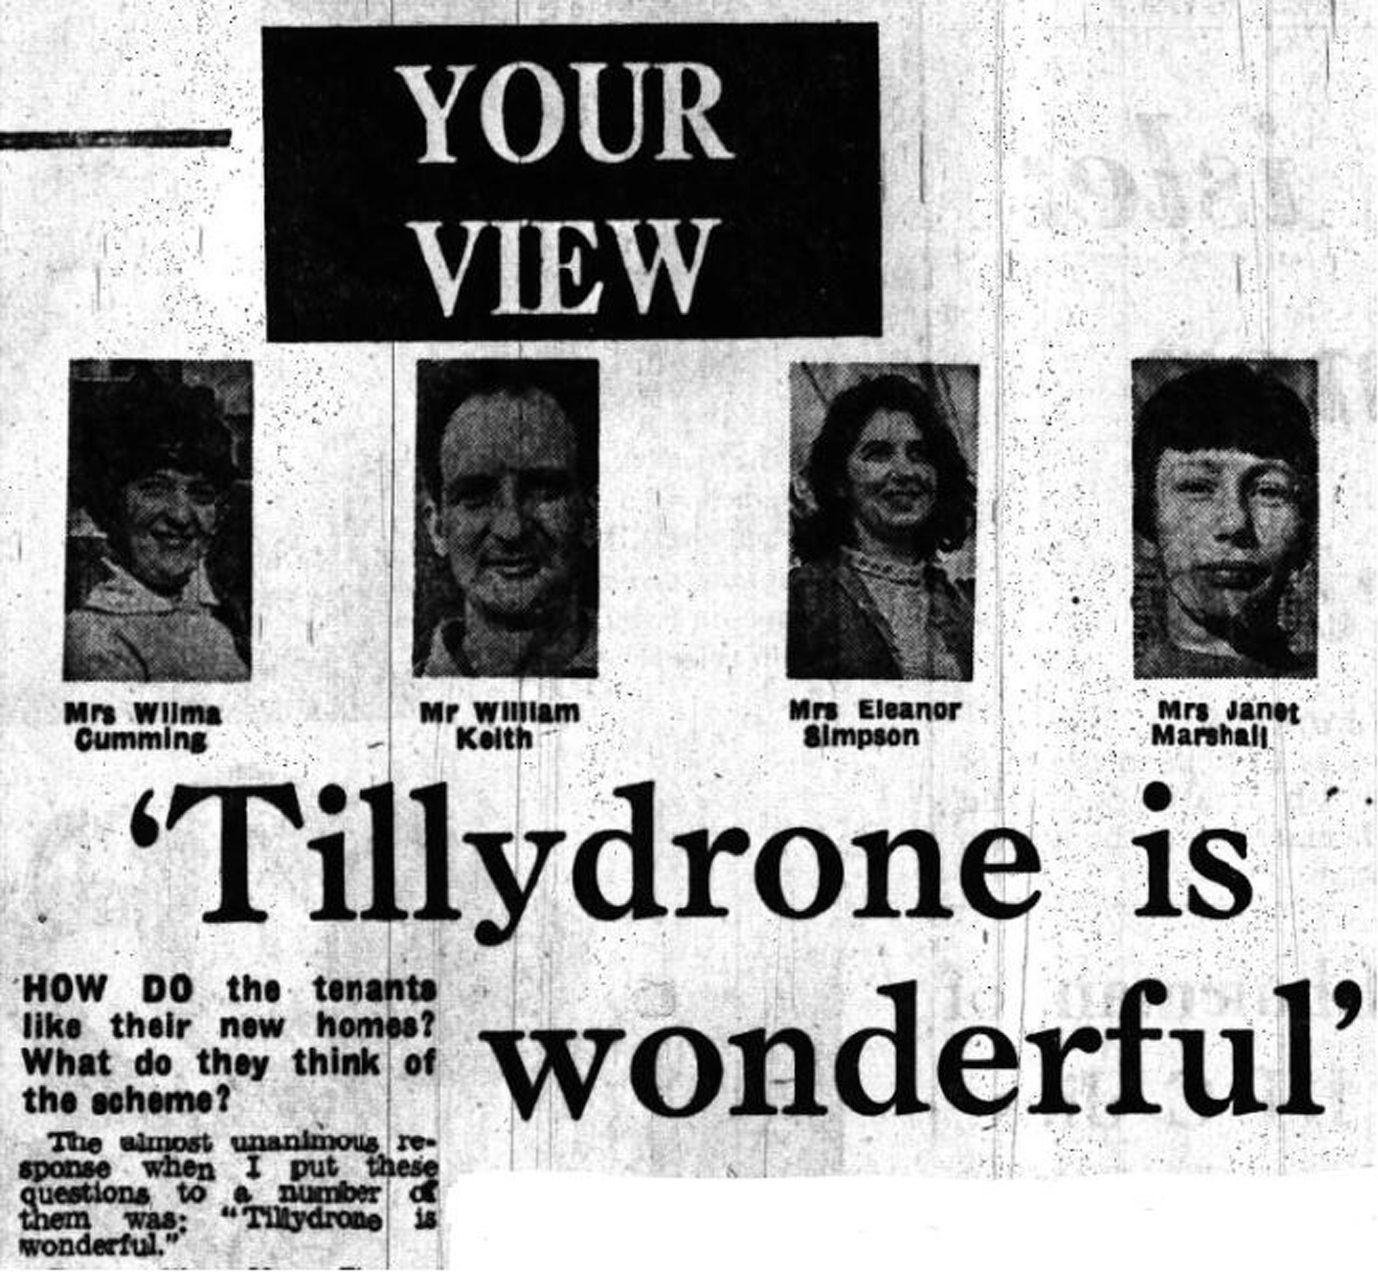 A newspaper clipping reading "Tillydrone is wonderful"